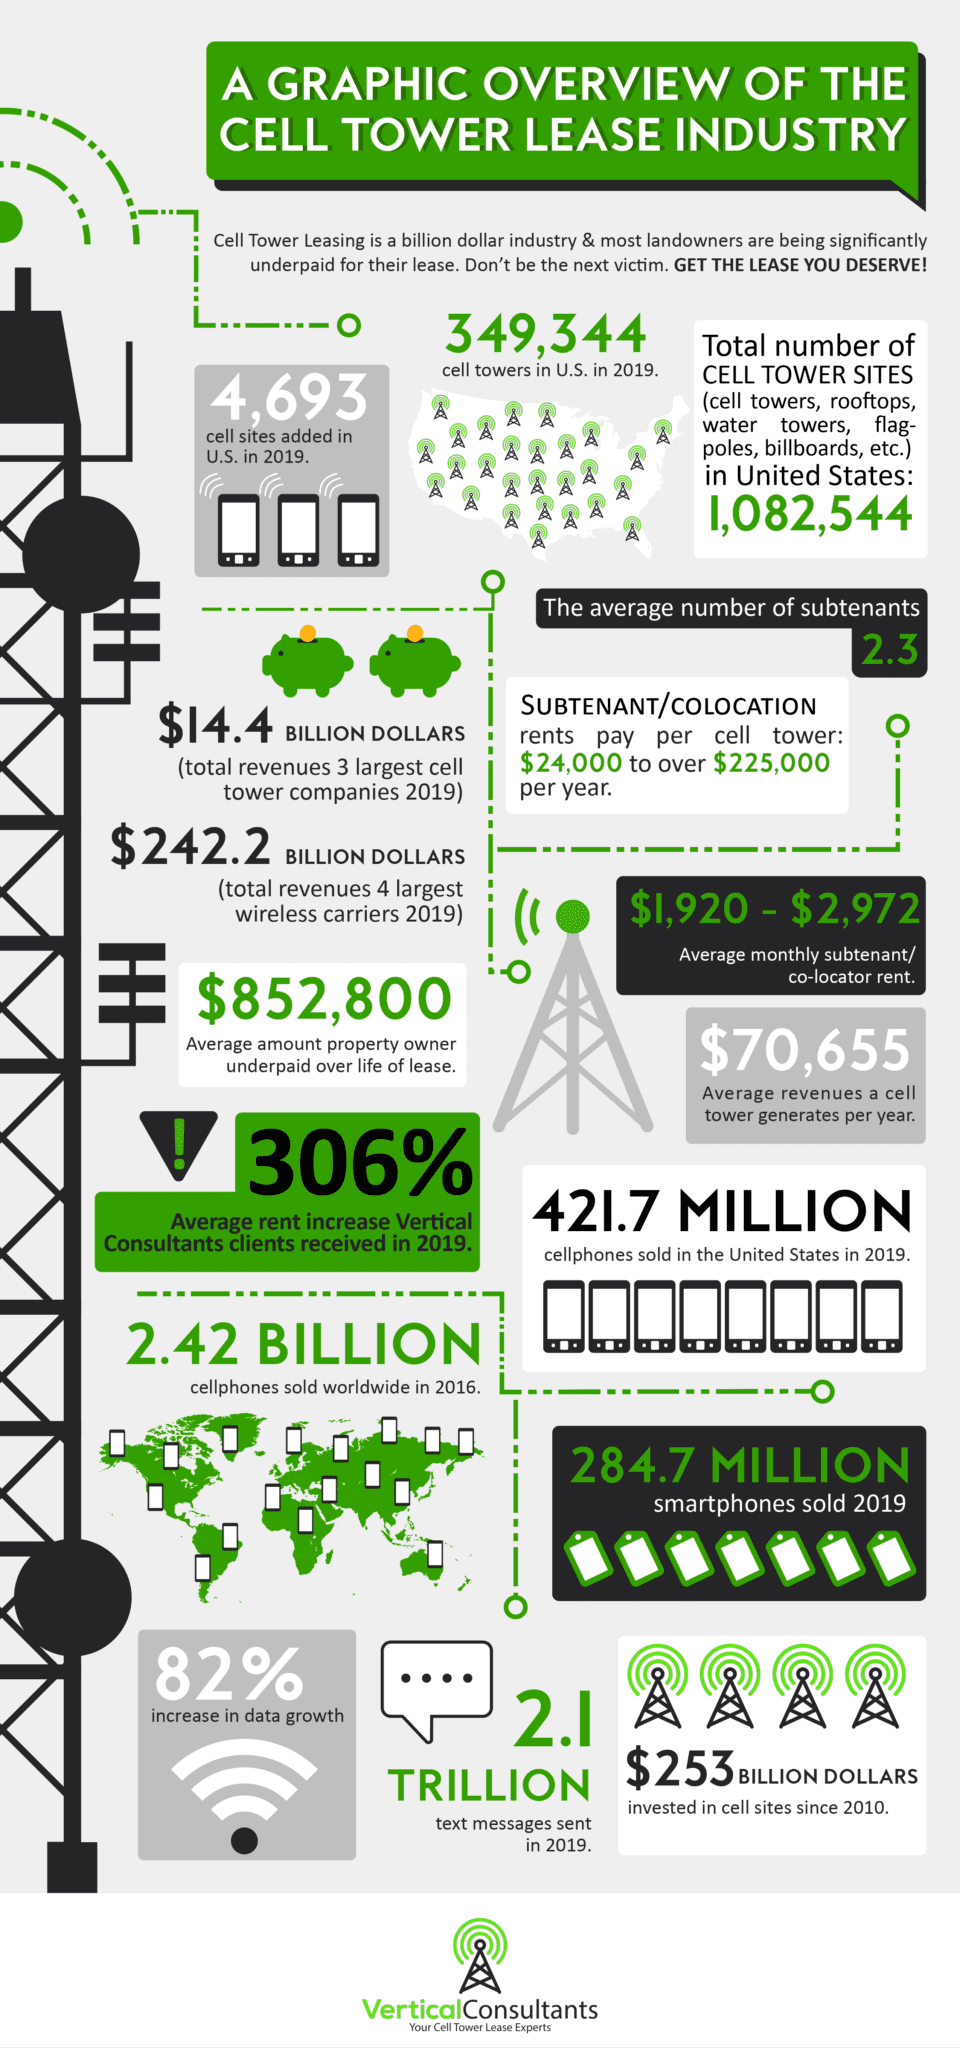 Cell Tower Leases by The Numbers